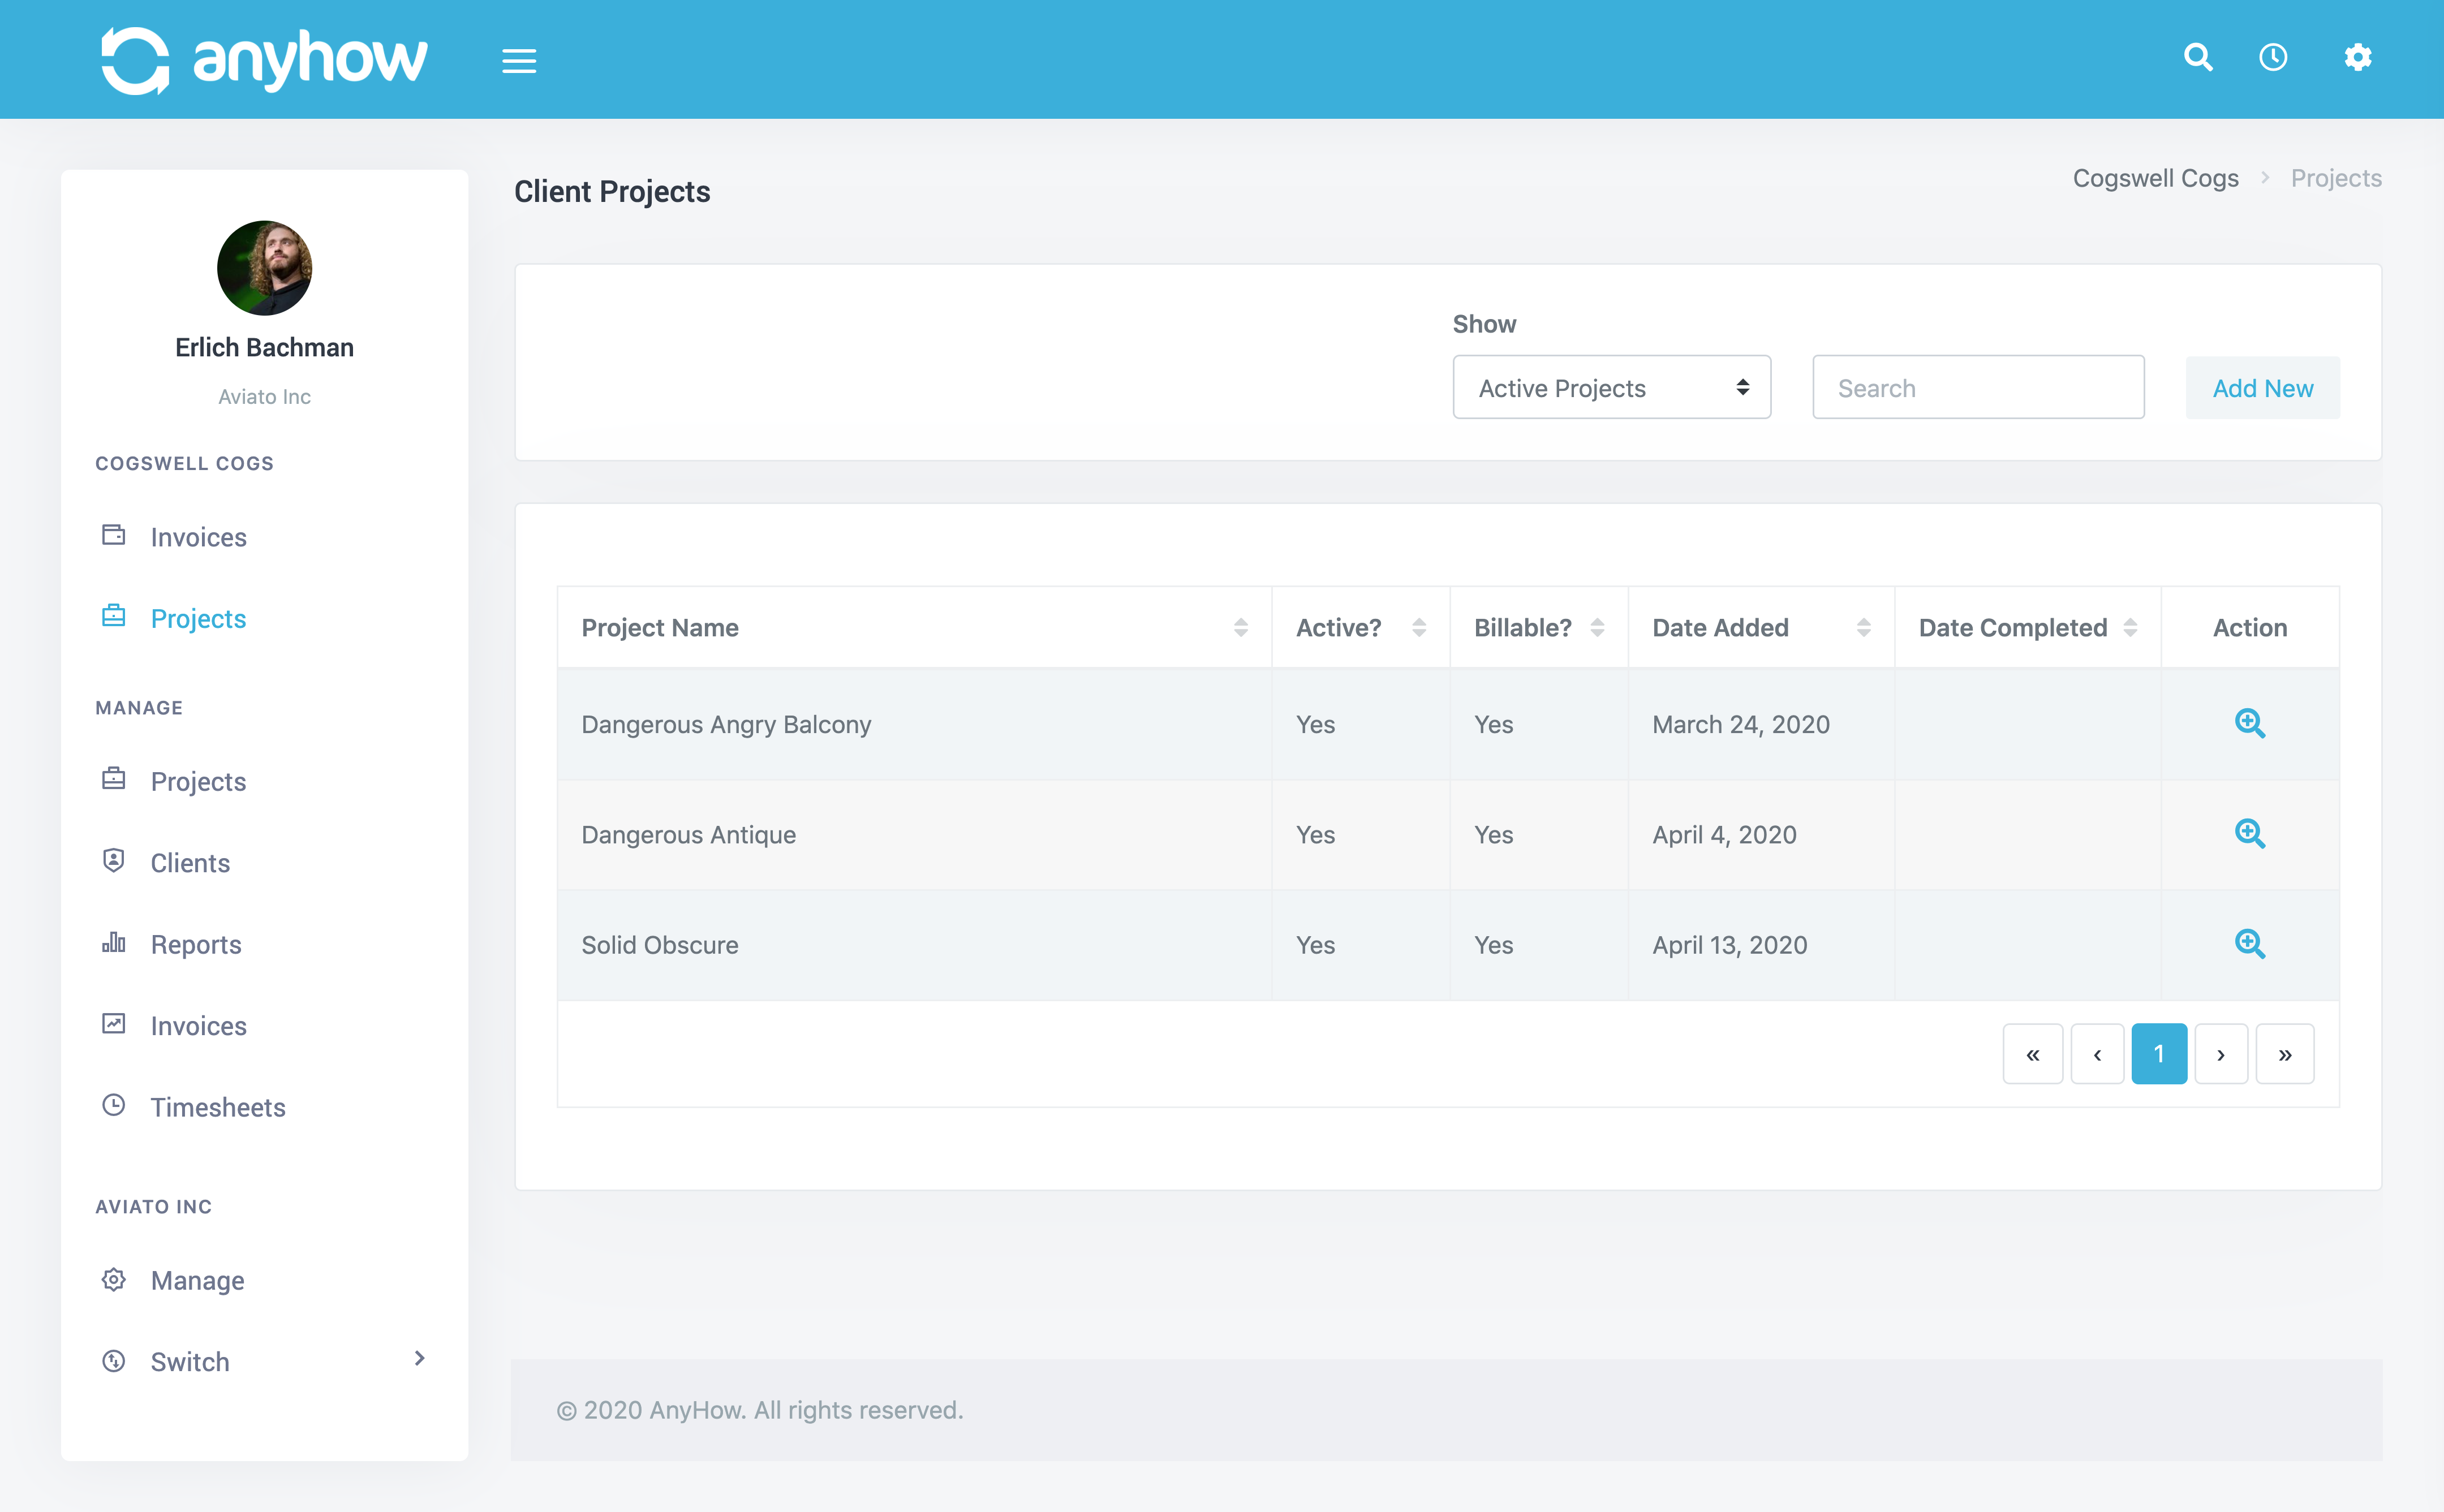 Screenshot of client projects section